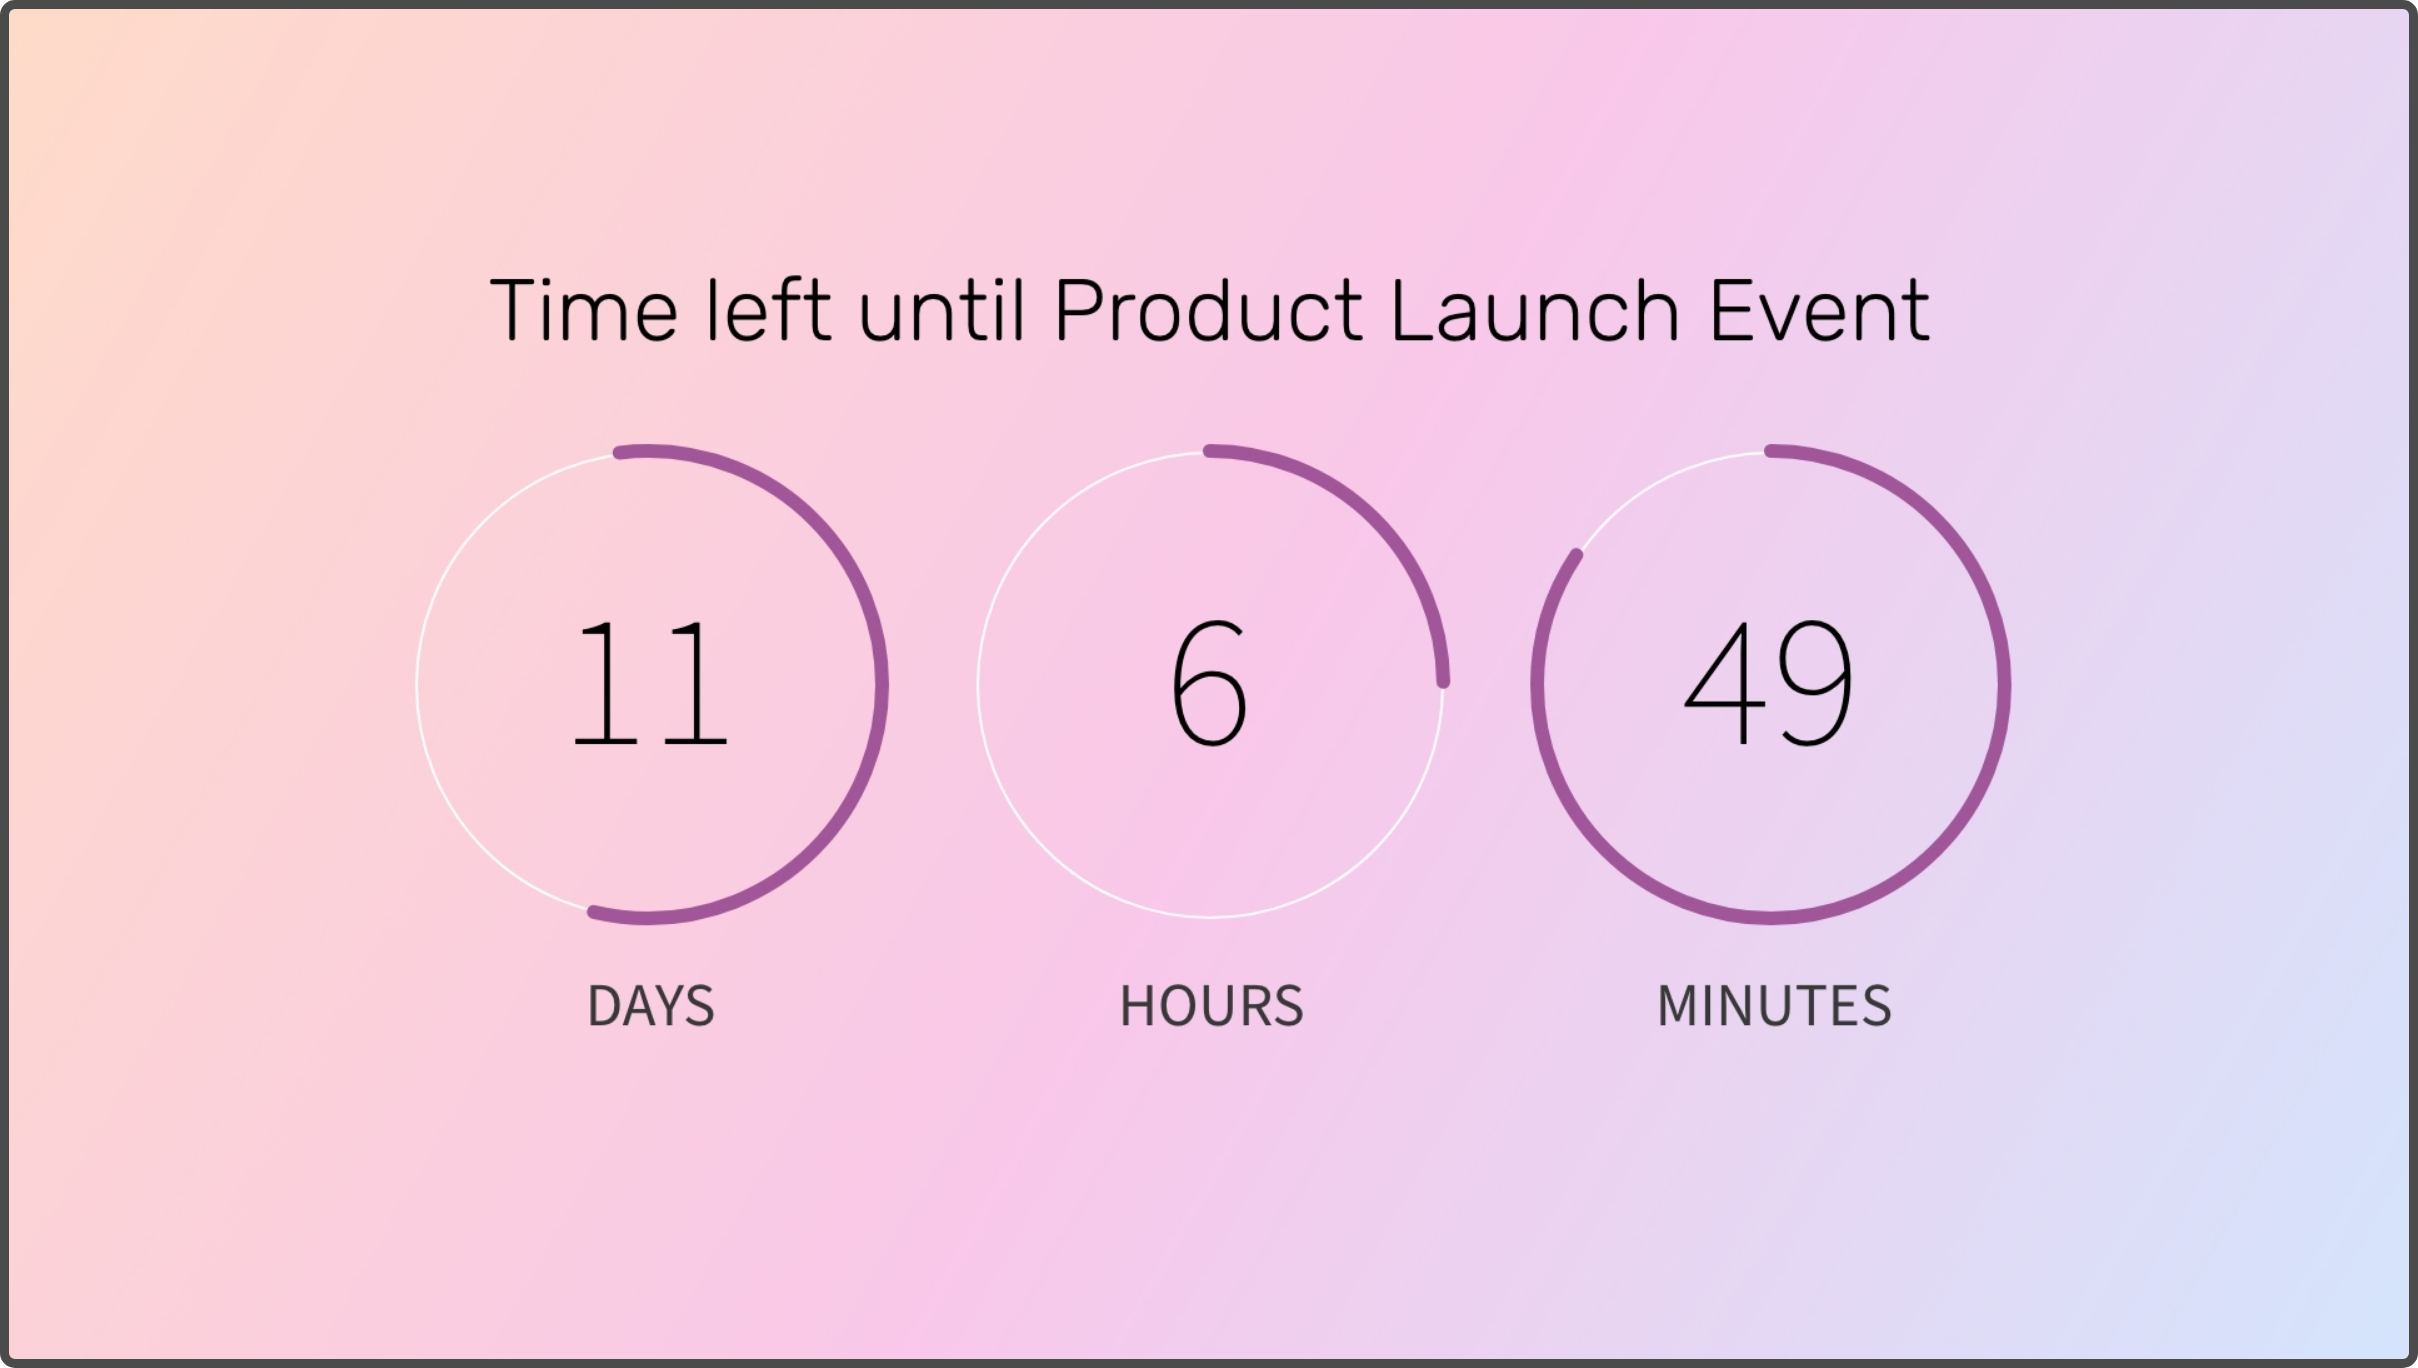 digital signage app showing countdown timer of 11 days 6 hours and 49 minutes left for product launch event on digital screen